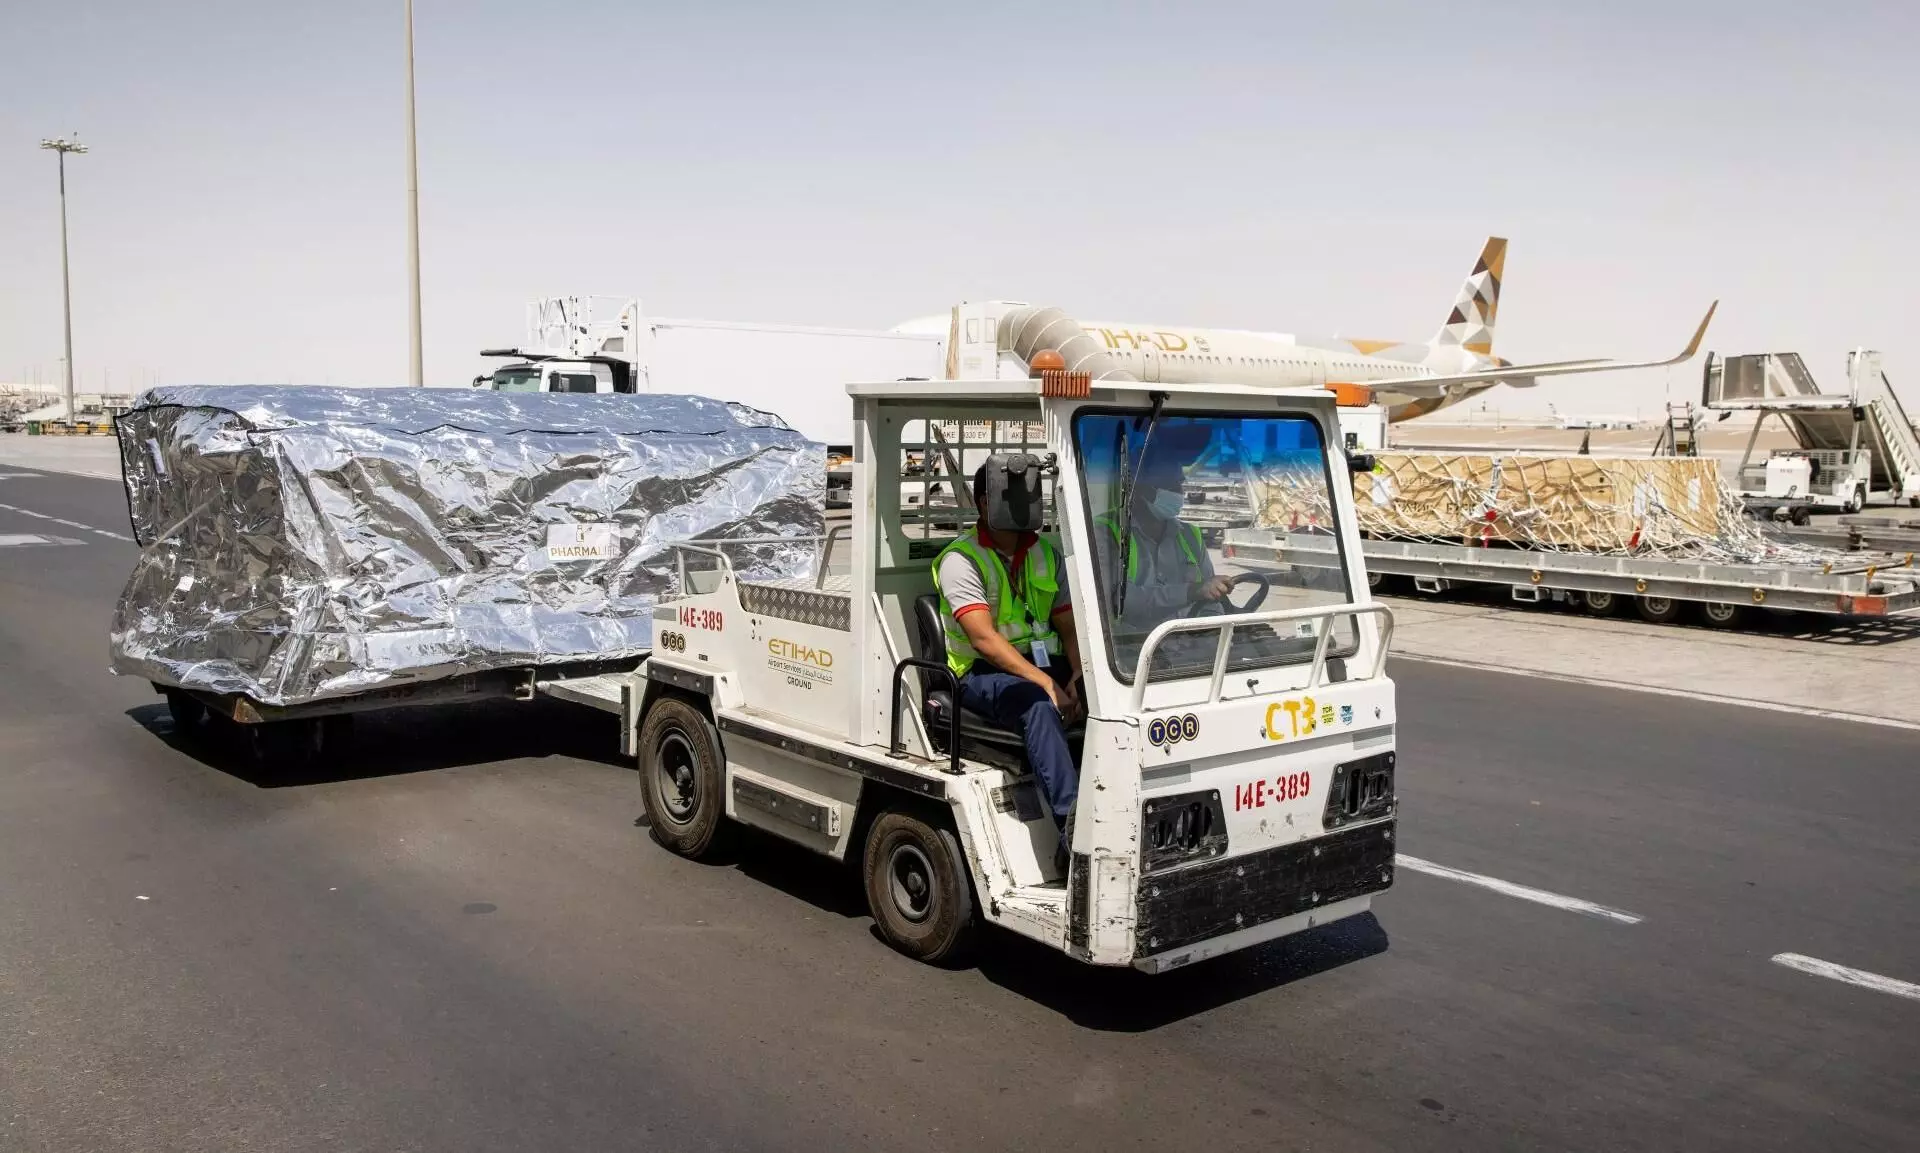 In the first half of 2022 Etihad Cargo carried 295,000 tonnes of freight